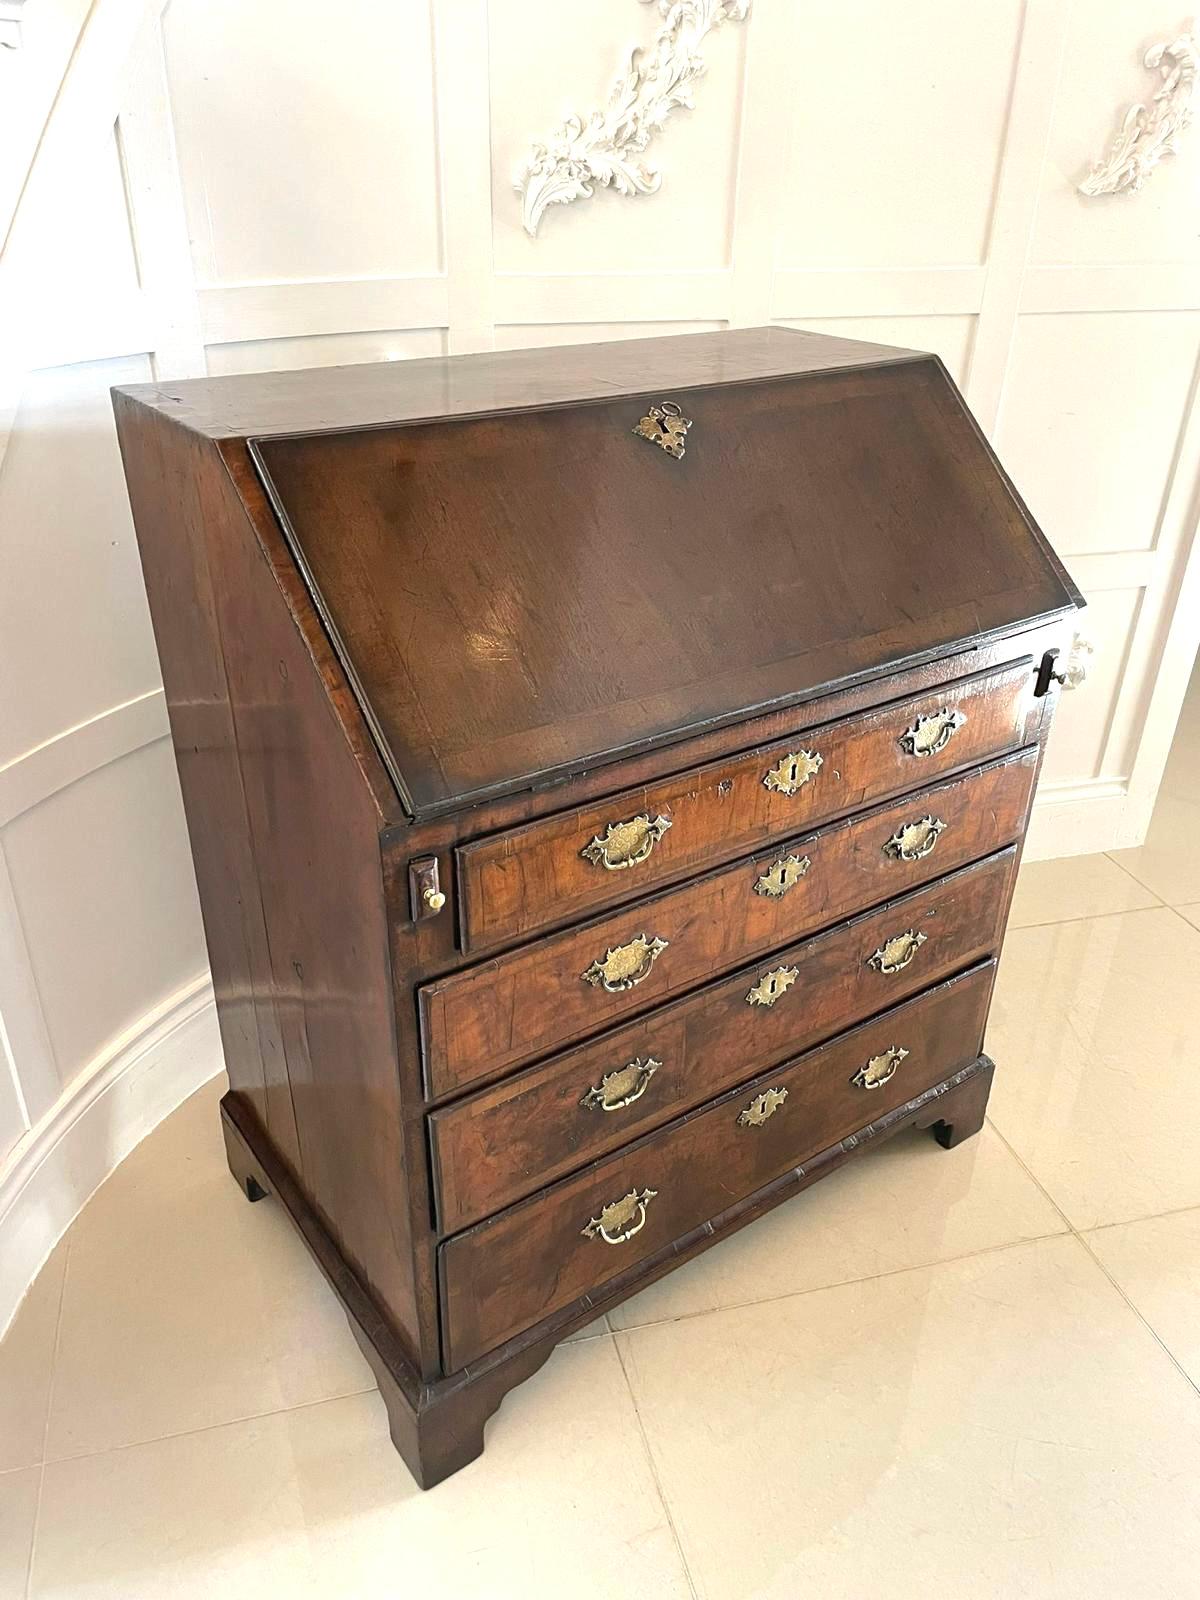 Antique George I quality figured walnut Herringbone inlaid bureau having a quality antique George I walnut bureau with a walnut herringbone inlaid fall opening to reveal a fitted interior consisting of 4 drawers, 6 pigeon holes, a door and a well, 4